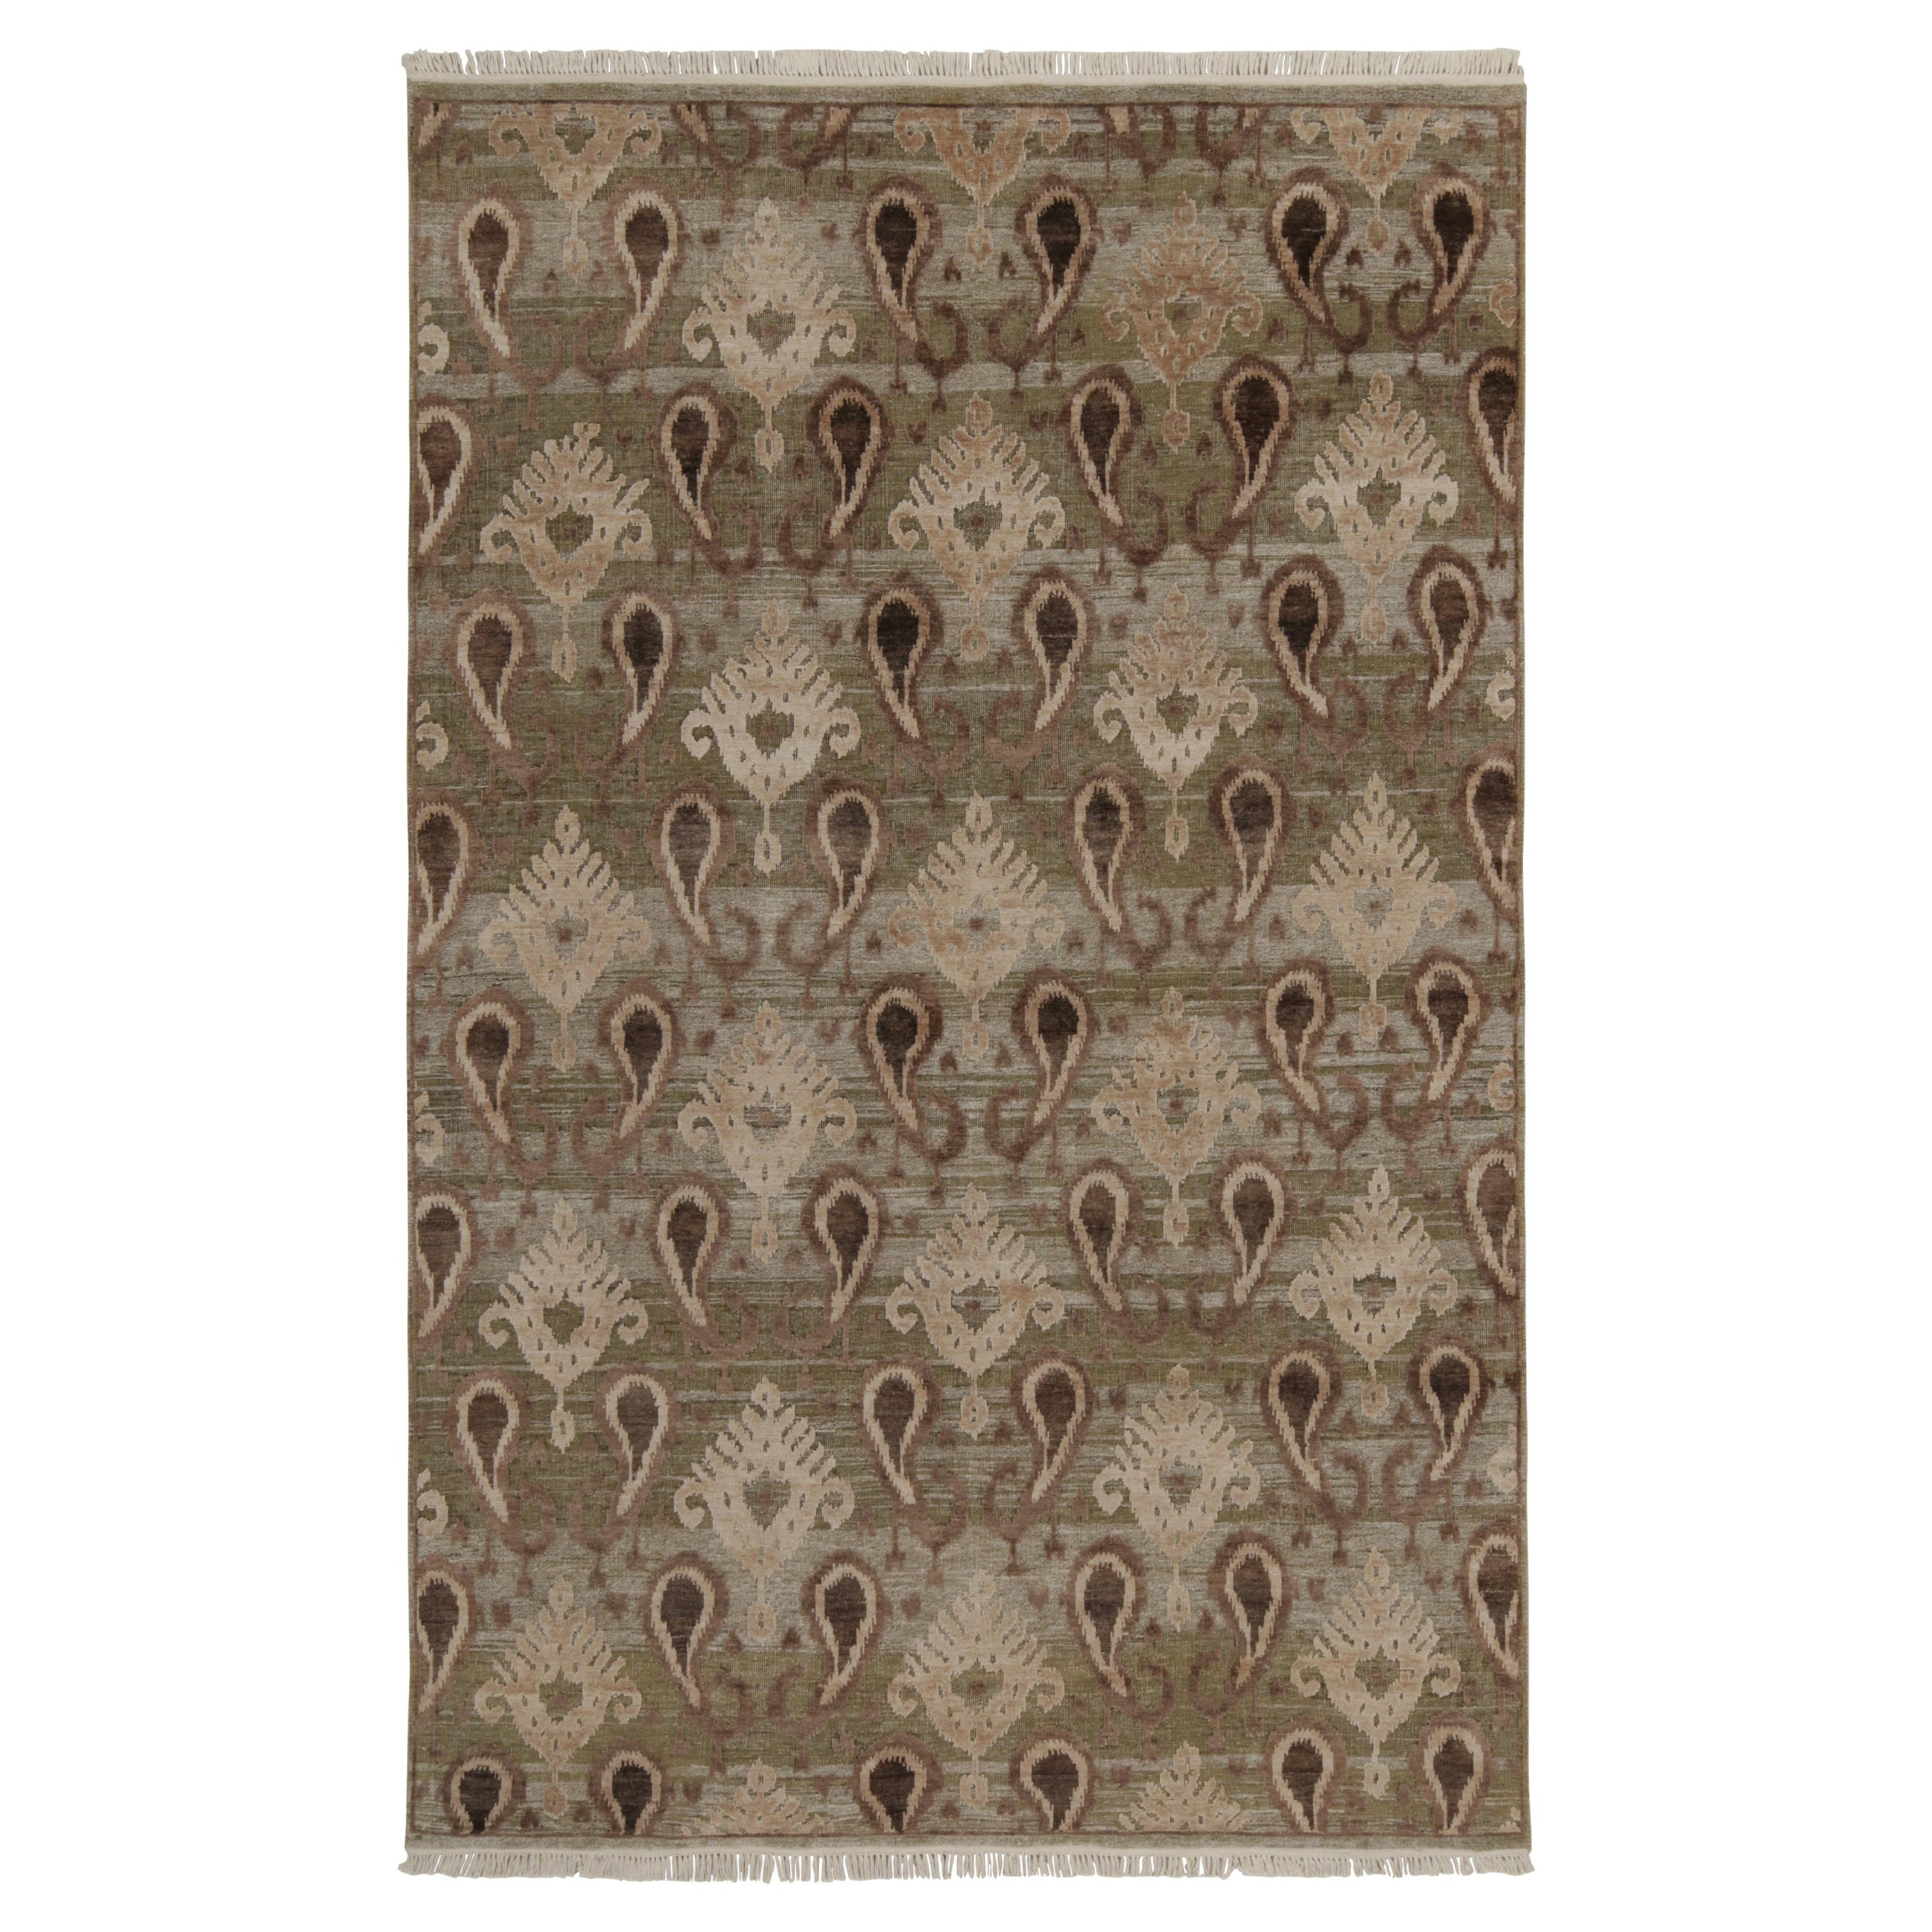 Rug & Kilim’s Ikats Style rug in Green with Beige-Brown Paisley Floral Patterns For Sale